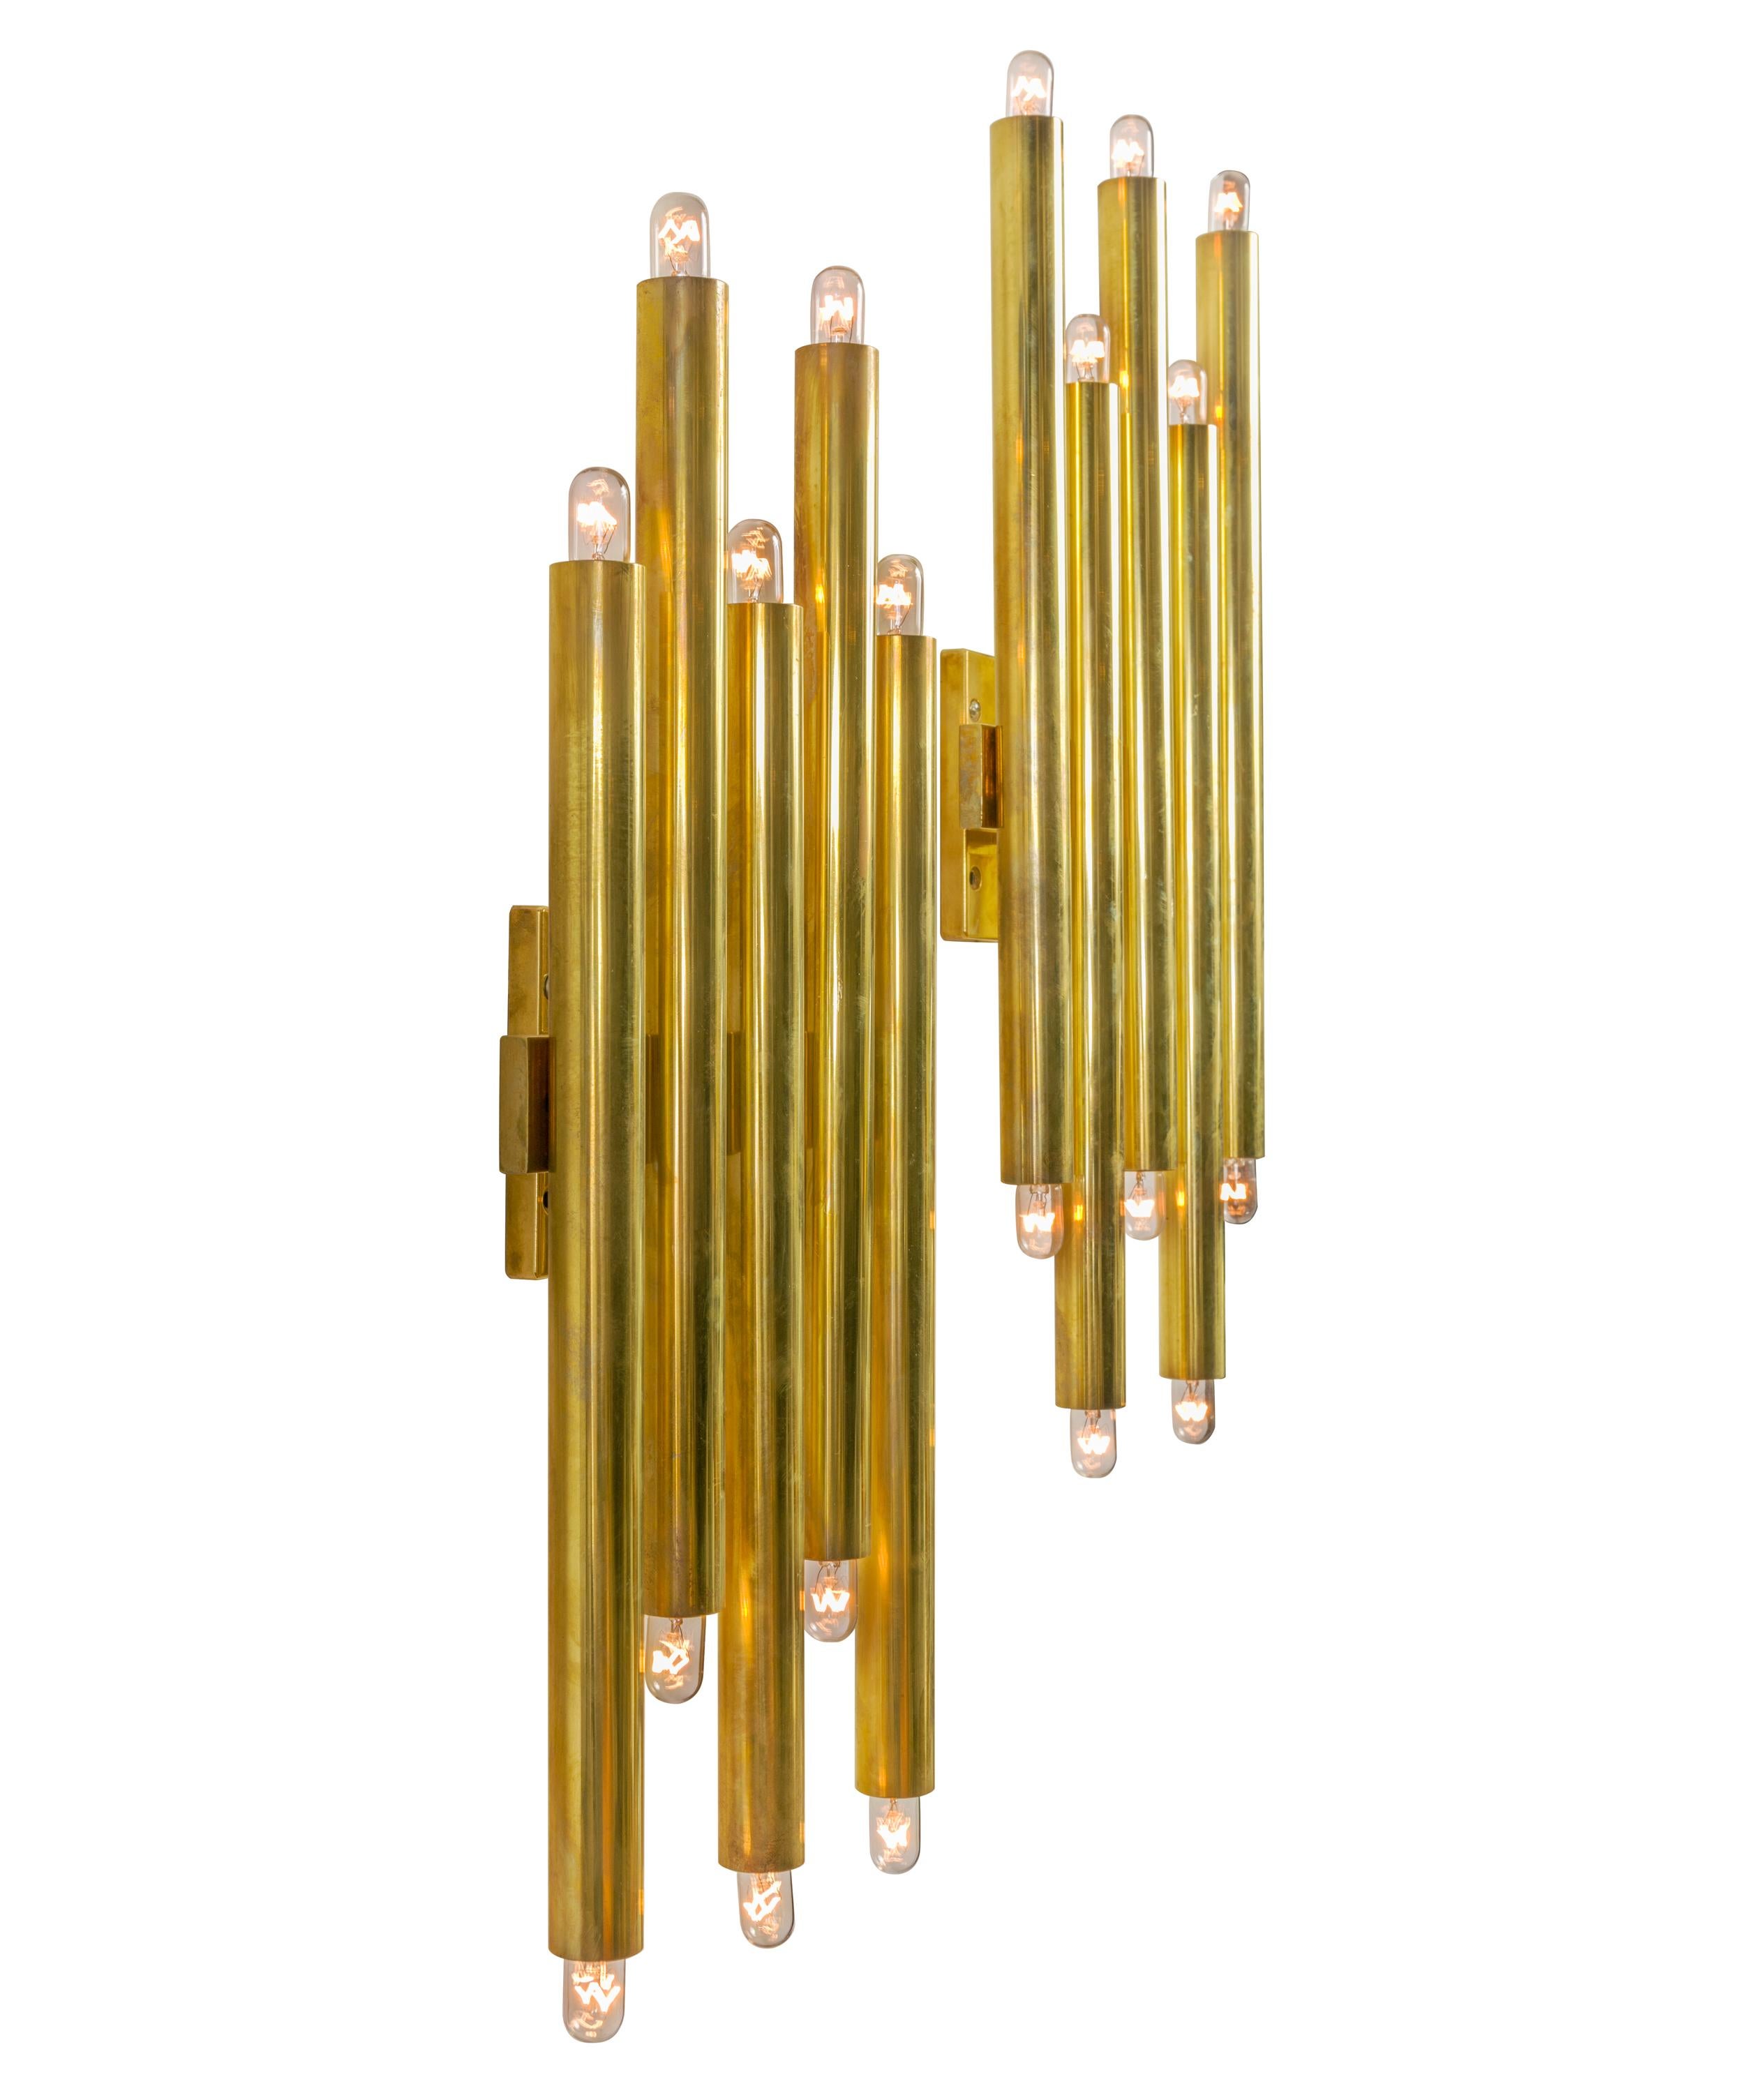 Elegant in their simplicity these sconces can work in a formal or more casual interior. The variety of bulbs that can be used allows you to create dramatically different effects.